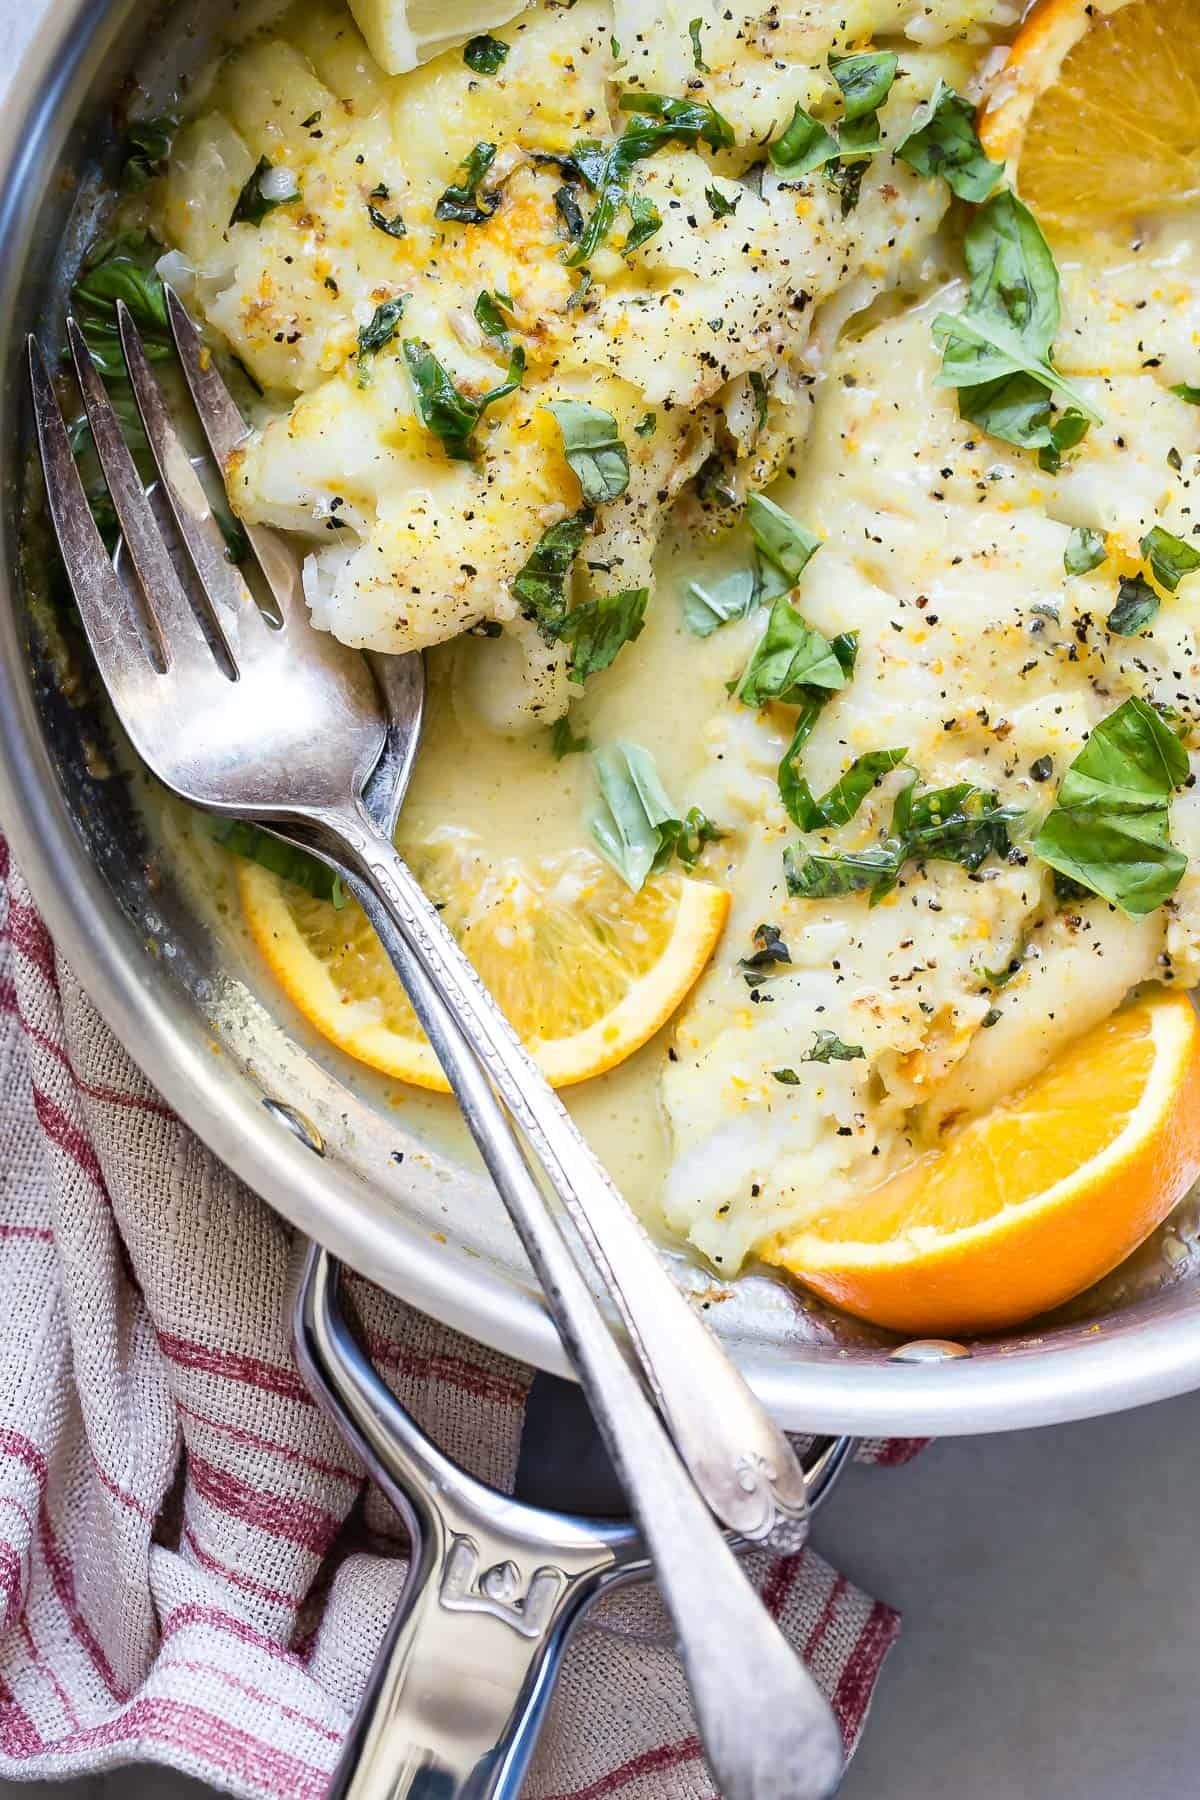 Pan fried cod in citrus butter sauce.